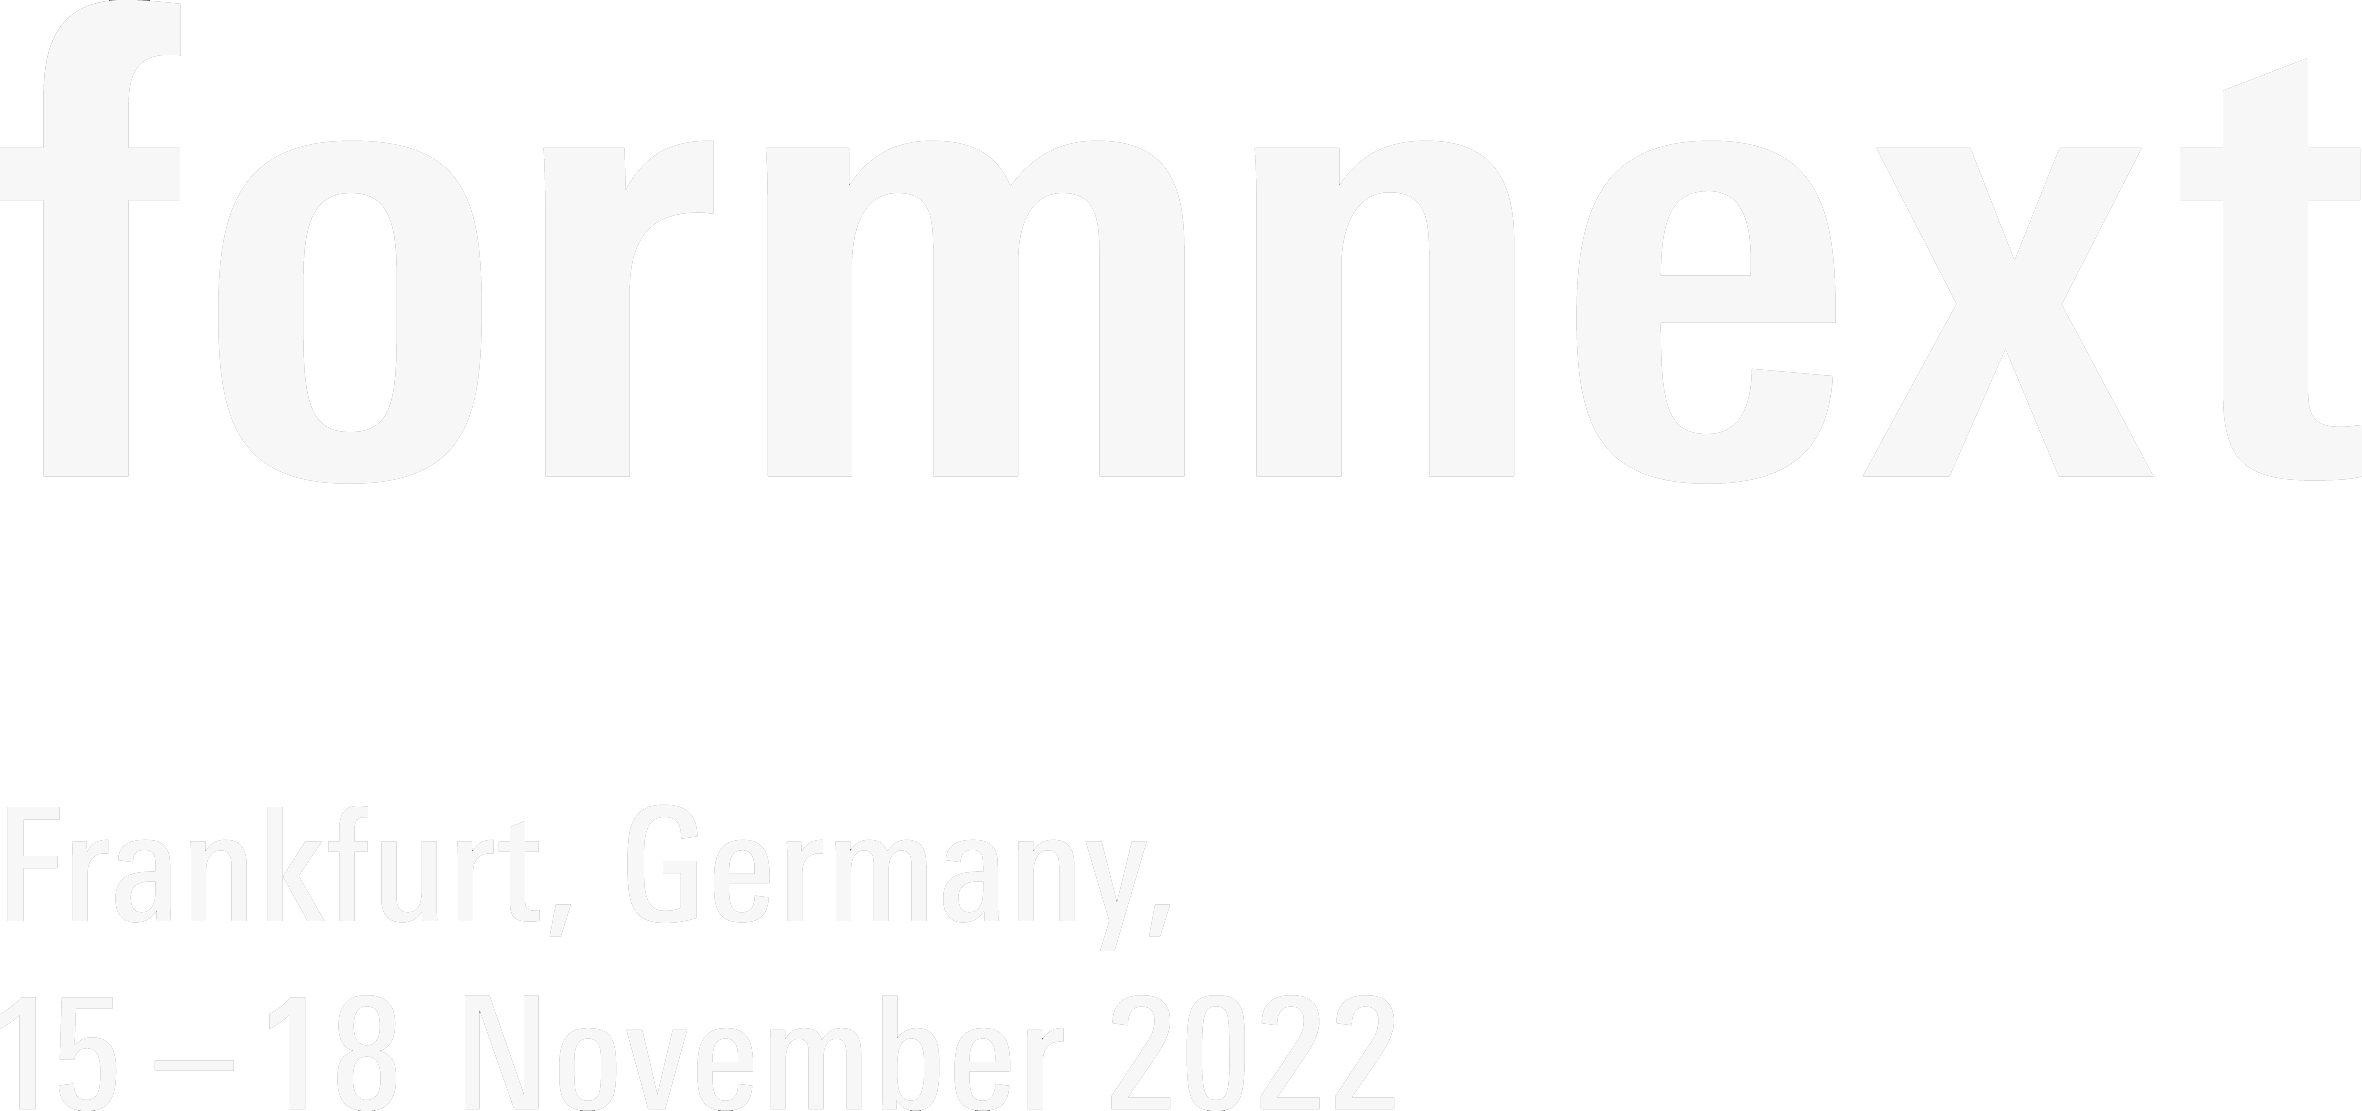 Meet our members at the Formnext 2022 exhibition Polymeris